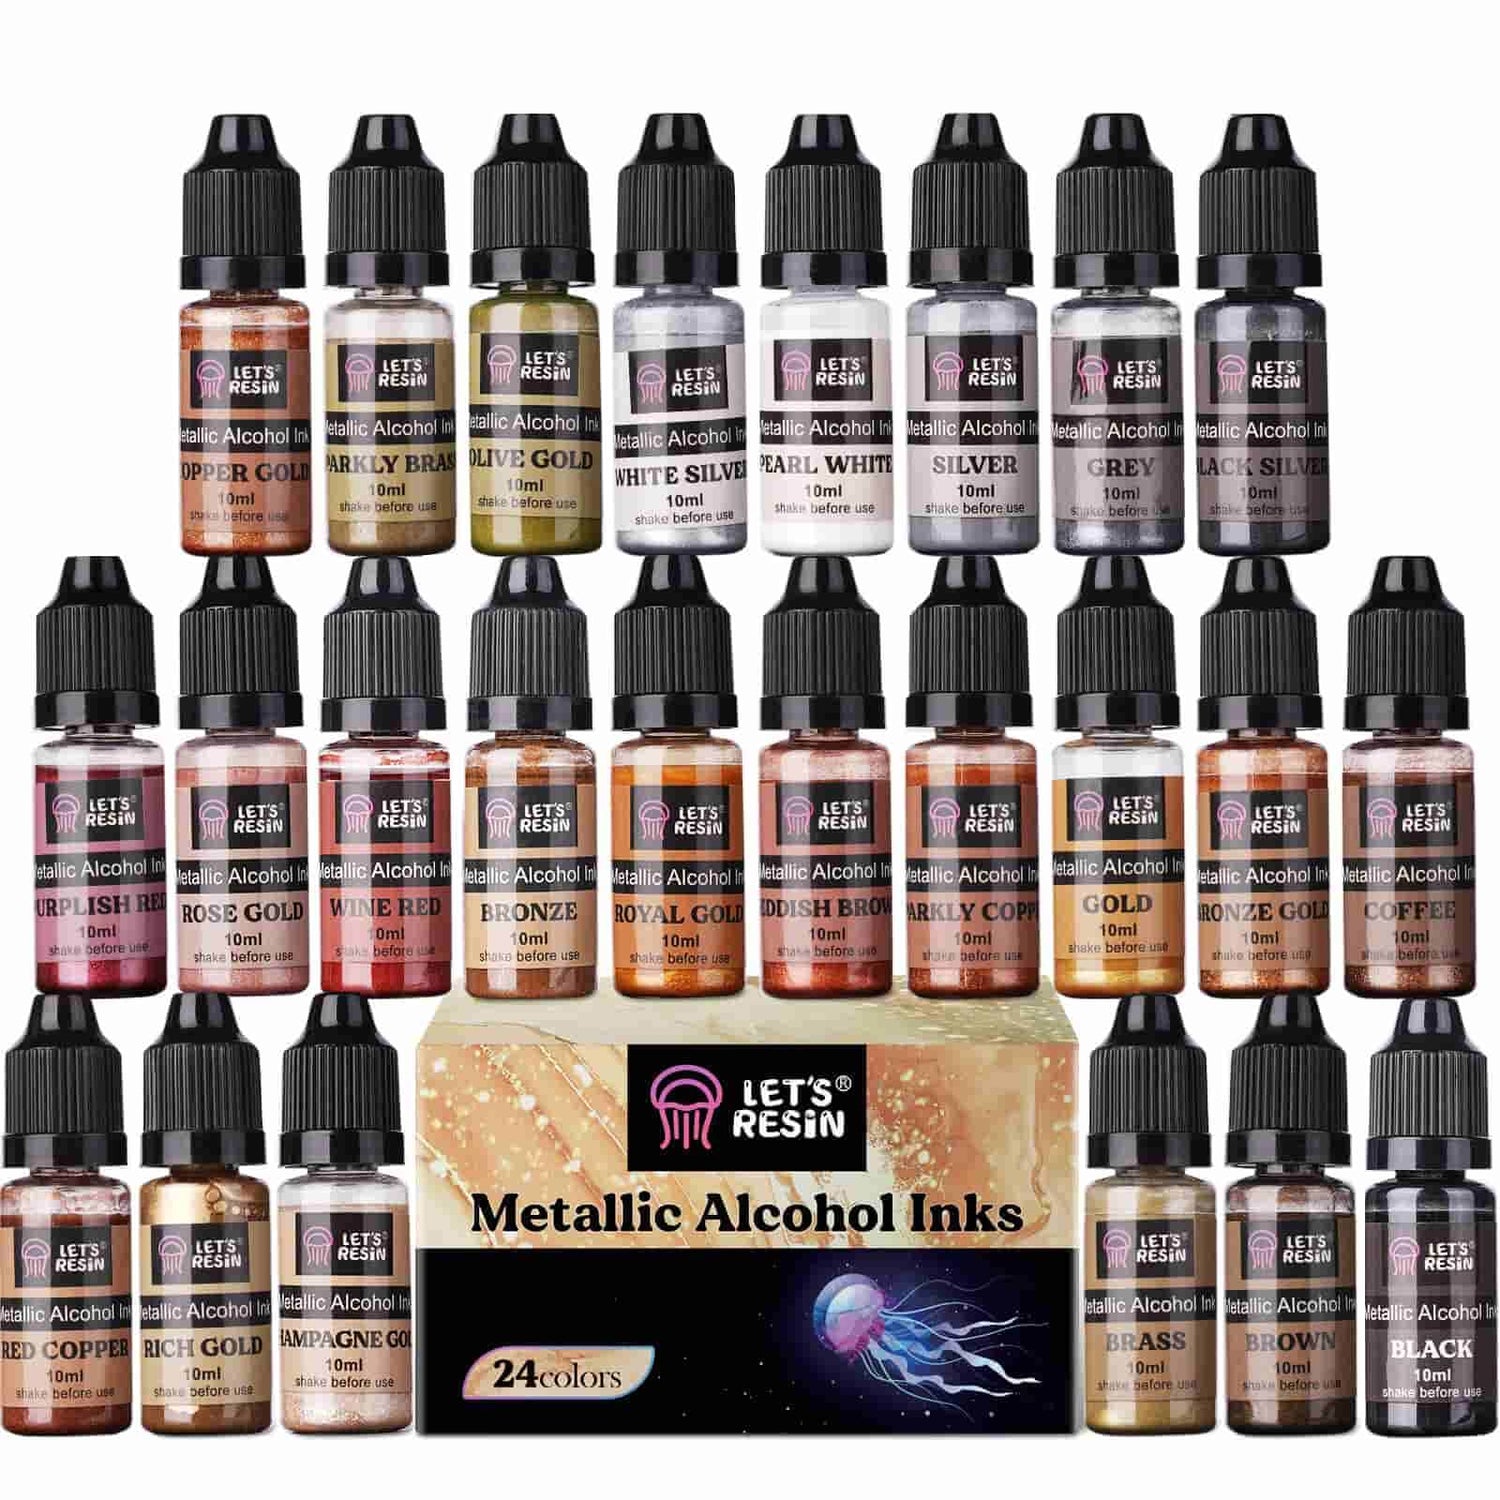 Let's Resin Metallic Alcohol Ink Set - 24 Colors